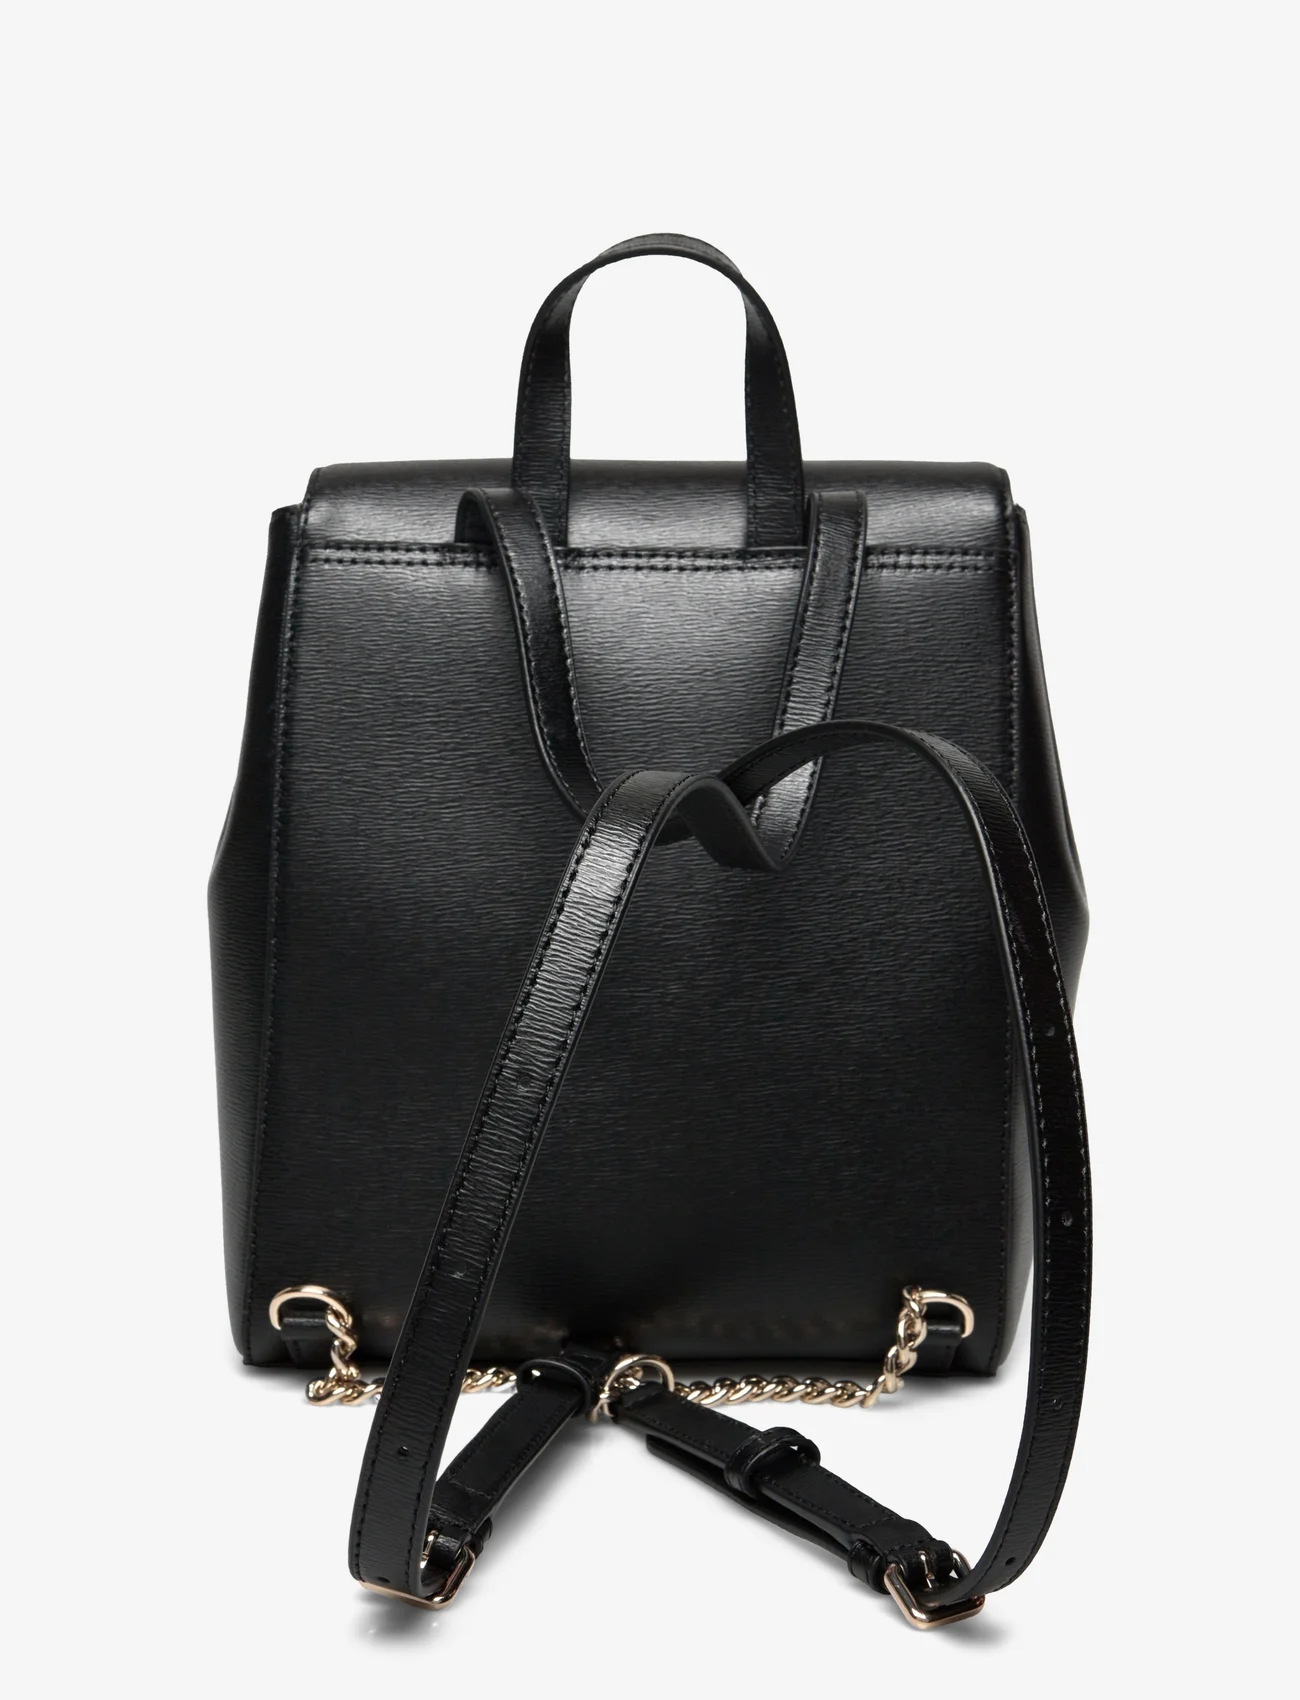 DKNY Bags - BRYANT FLAP BACKPACK - naised - bgd - blk/gold - 1